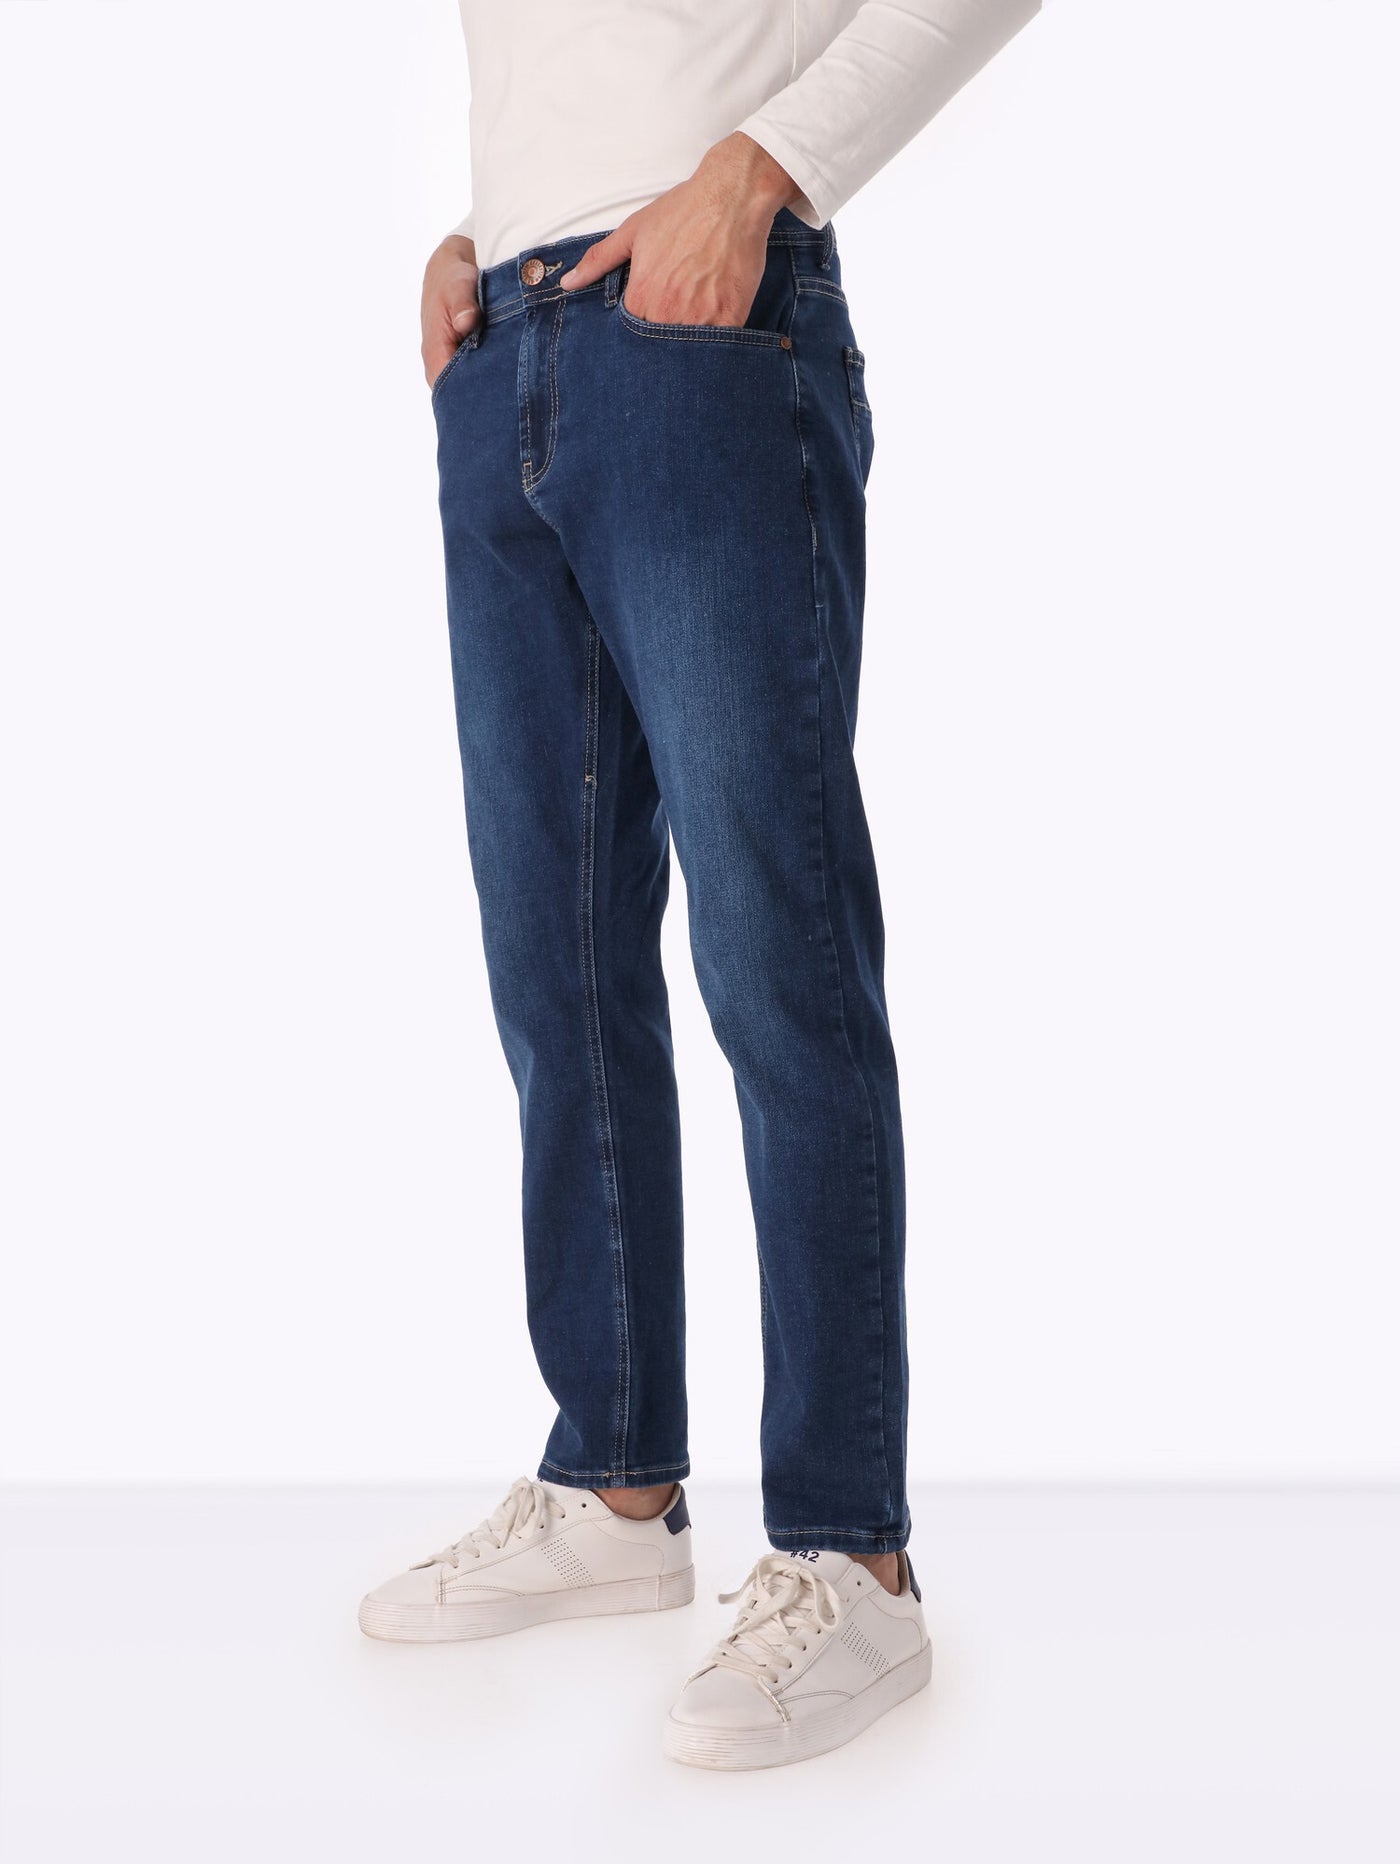 Jeans - Faded Effect - Regular Fit